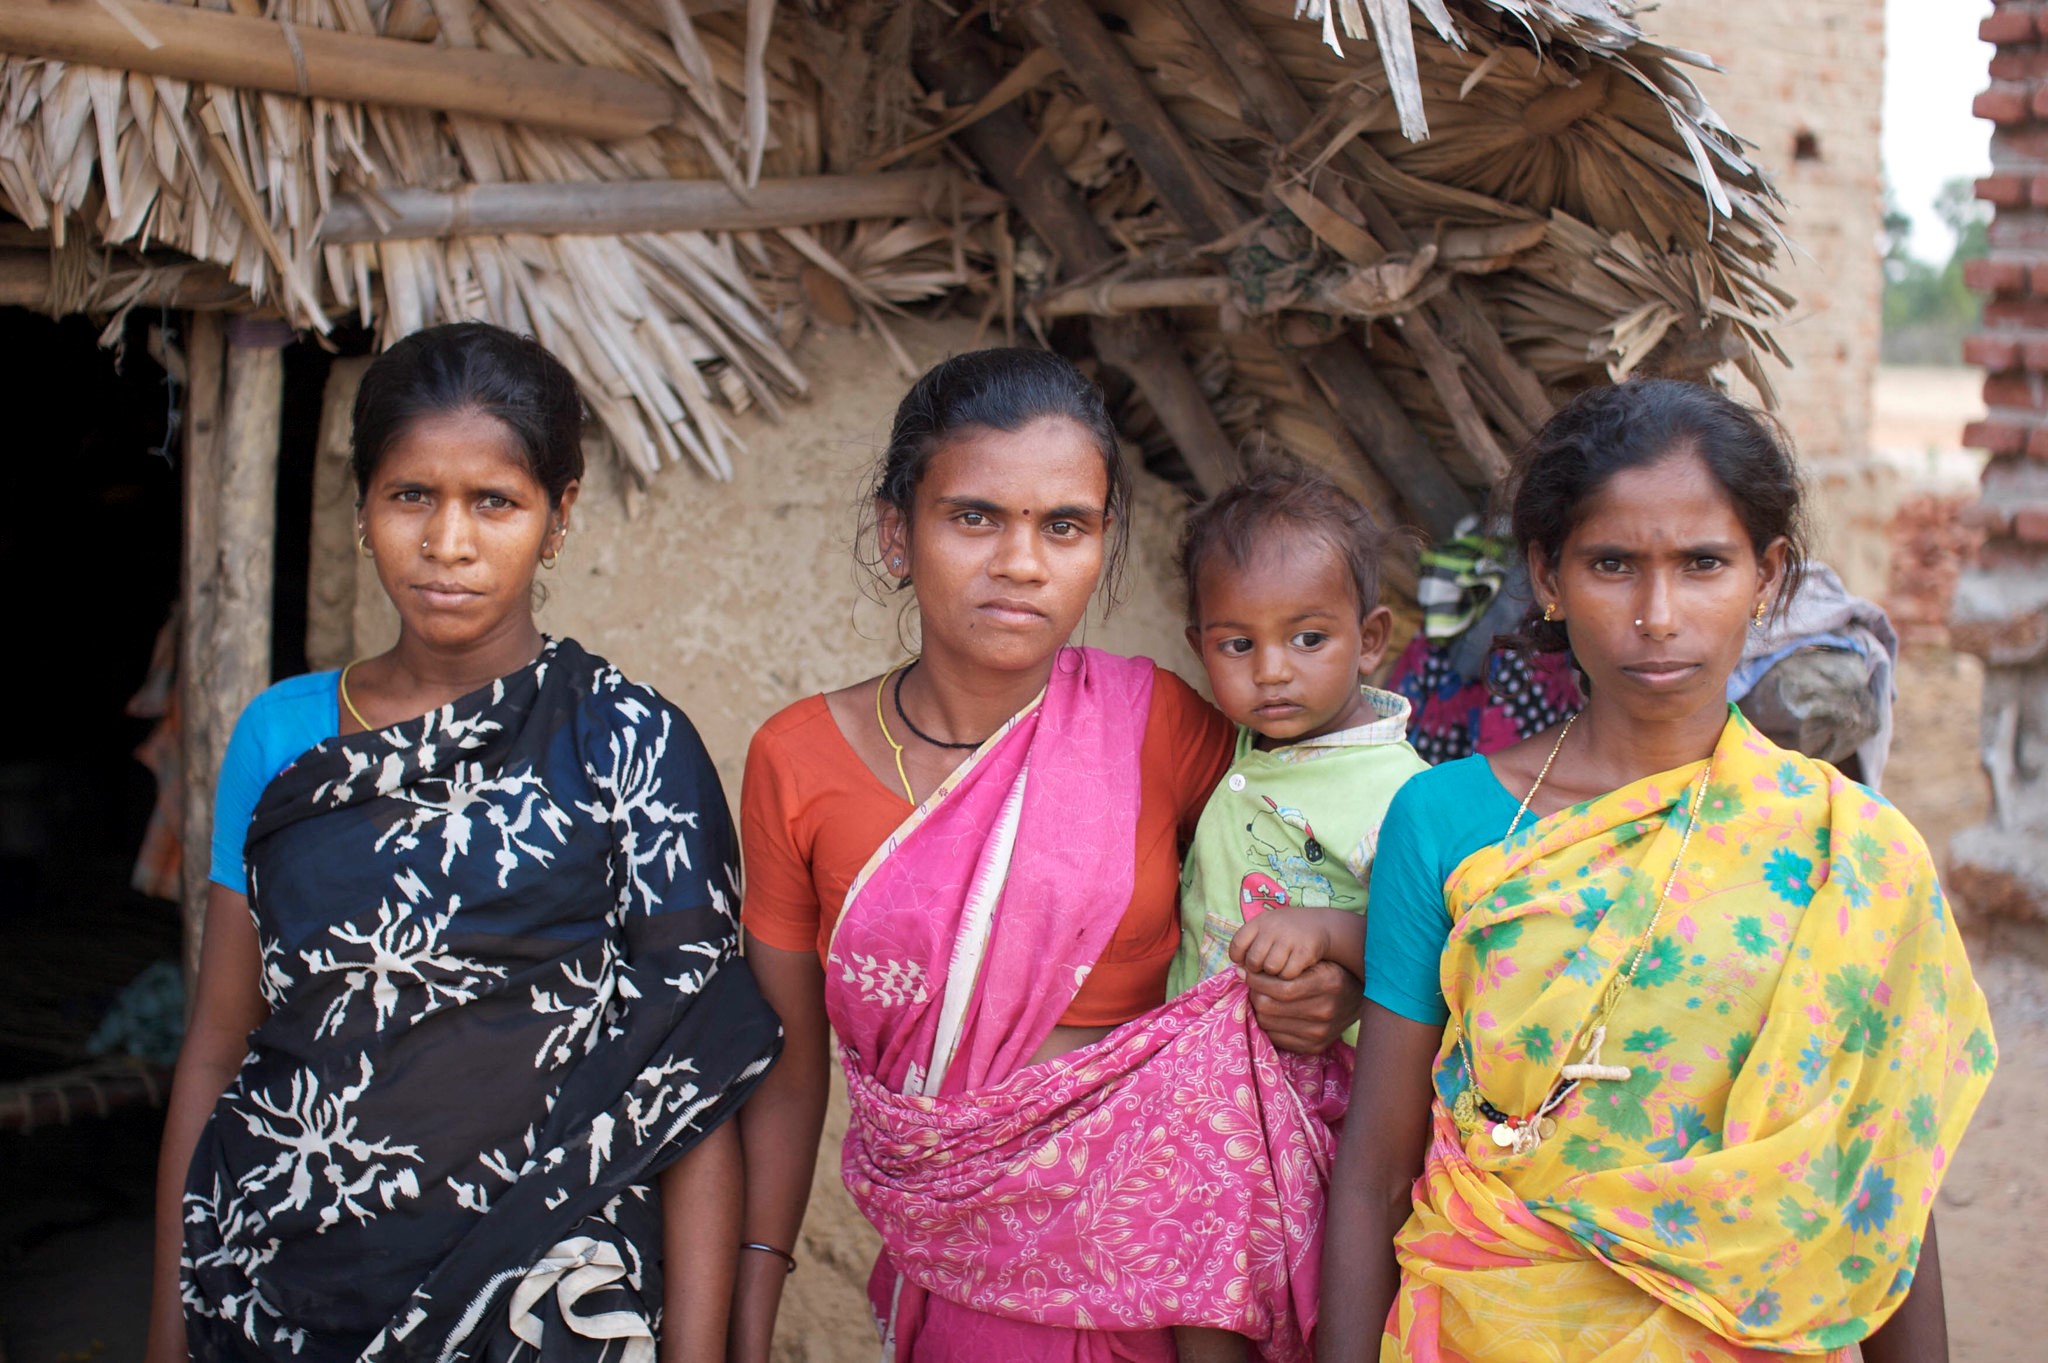 India’s Caste System: Dalit Poverty and Inequality | The Borgen Project